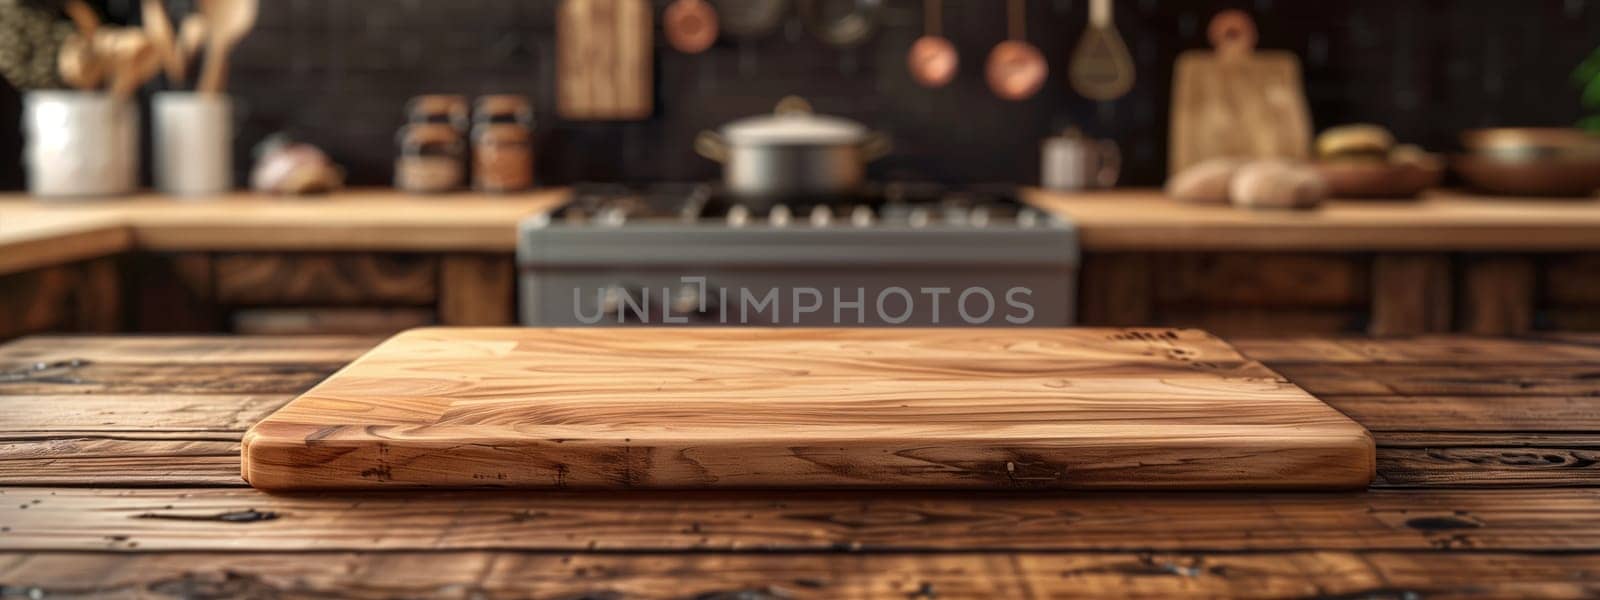 A wooden cutting board rests atop a hardwood table in a kitchen, showcasing the beauty of natural wood flooring and lumber craftsmanship